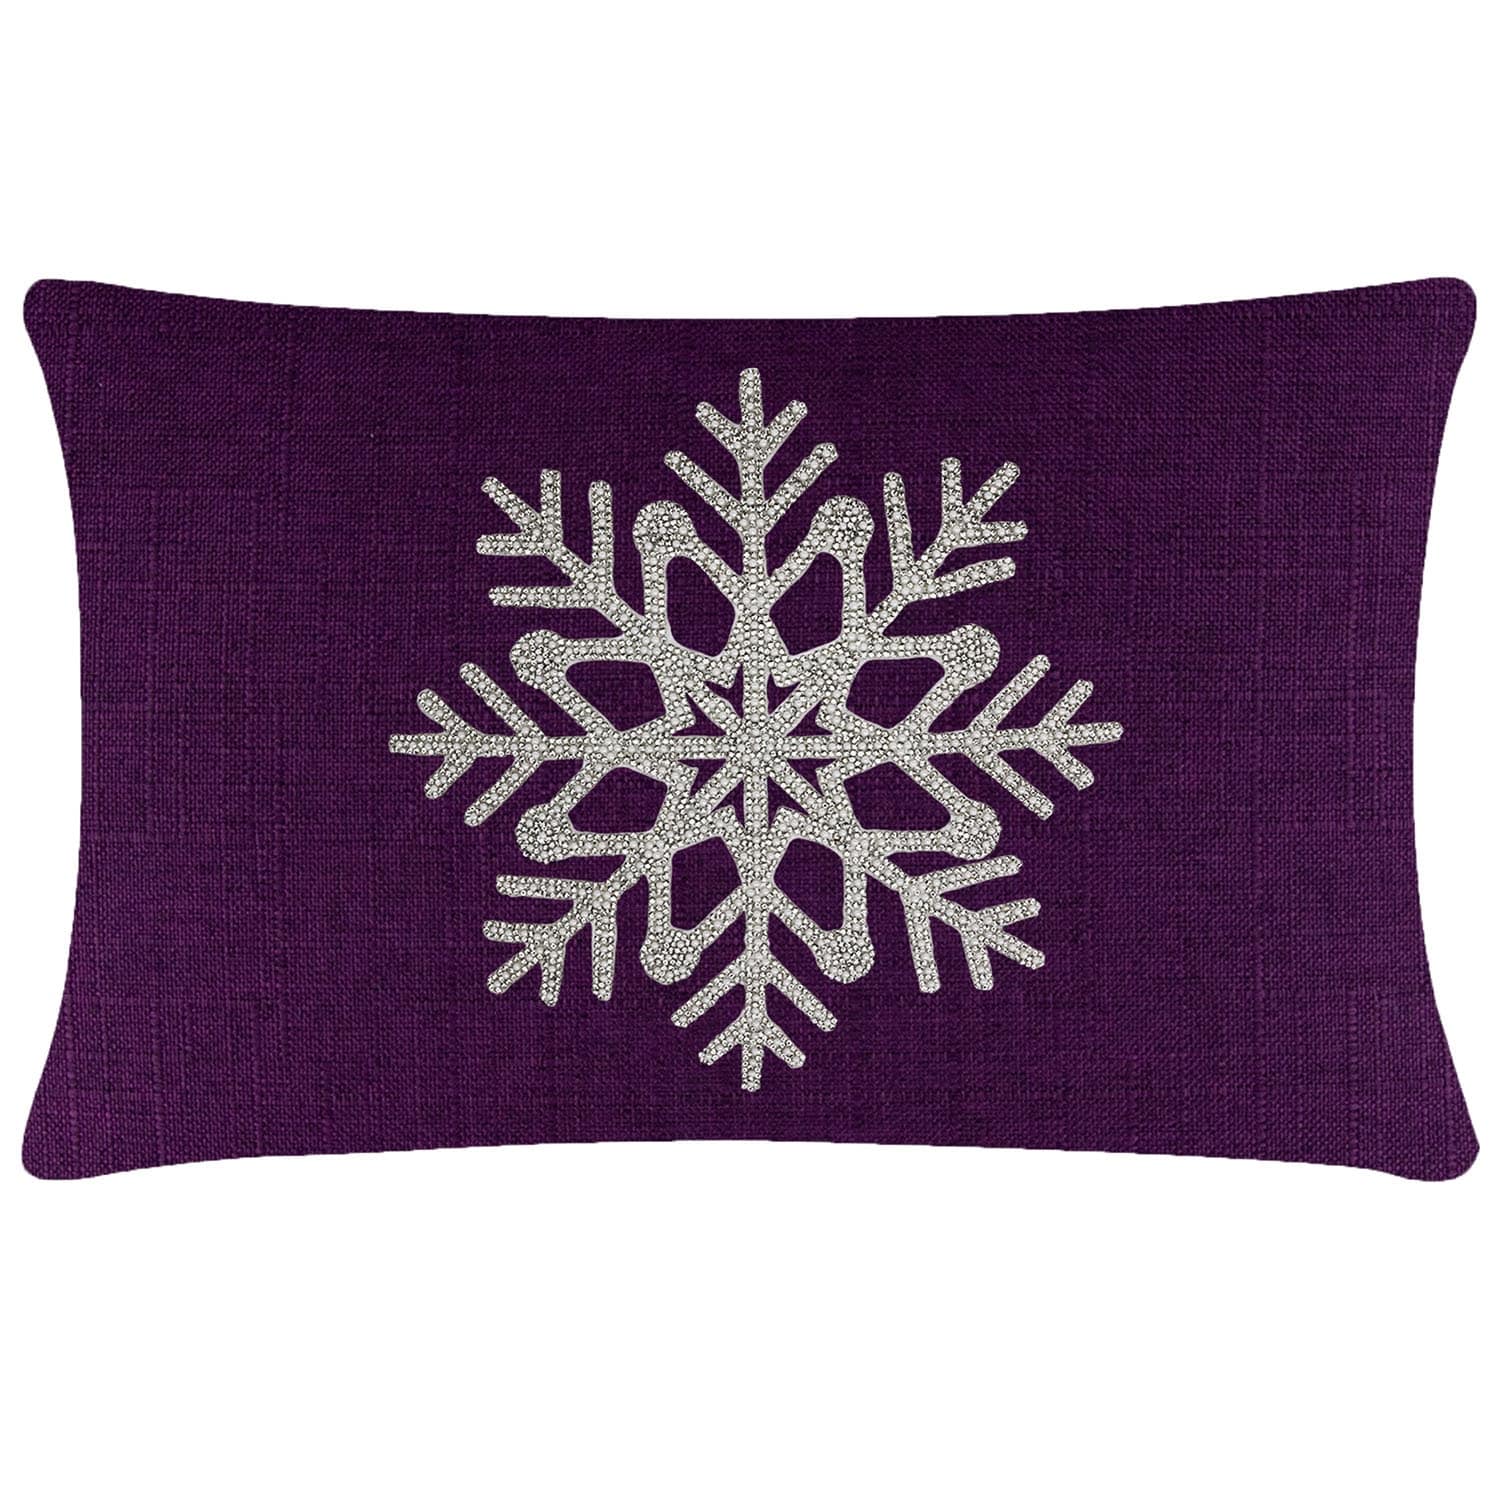 https://ak1.ostkcdn.com/images/products/is/images/direct/763ee6b085a076ee5c5340785ad58e20e30aabd3/Sparkles-Home-Rhinestone-Snowflake-Pillow.jpg